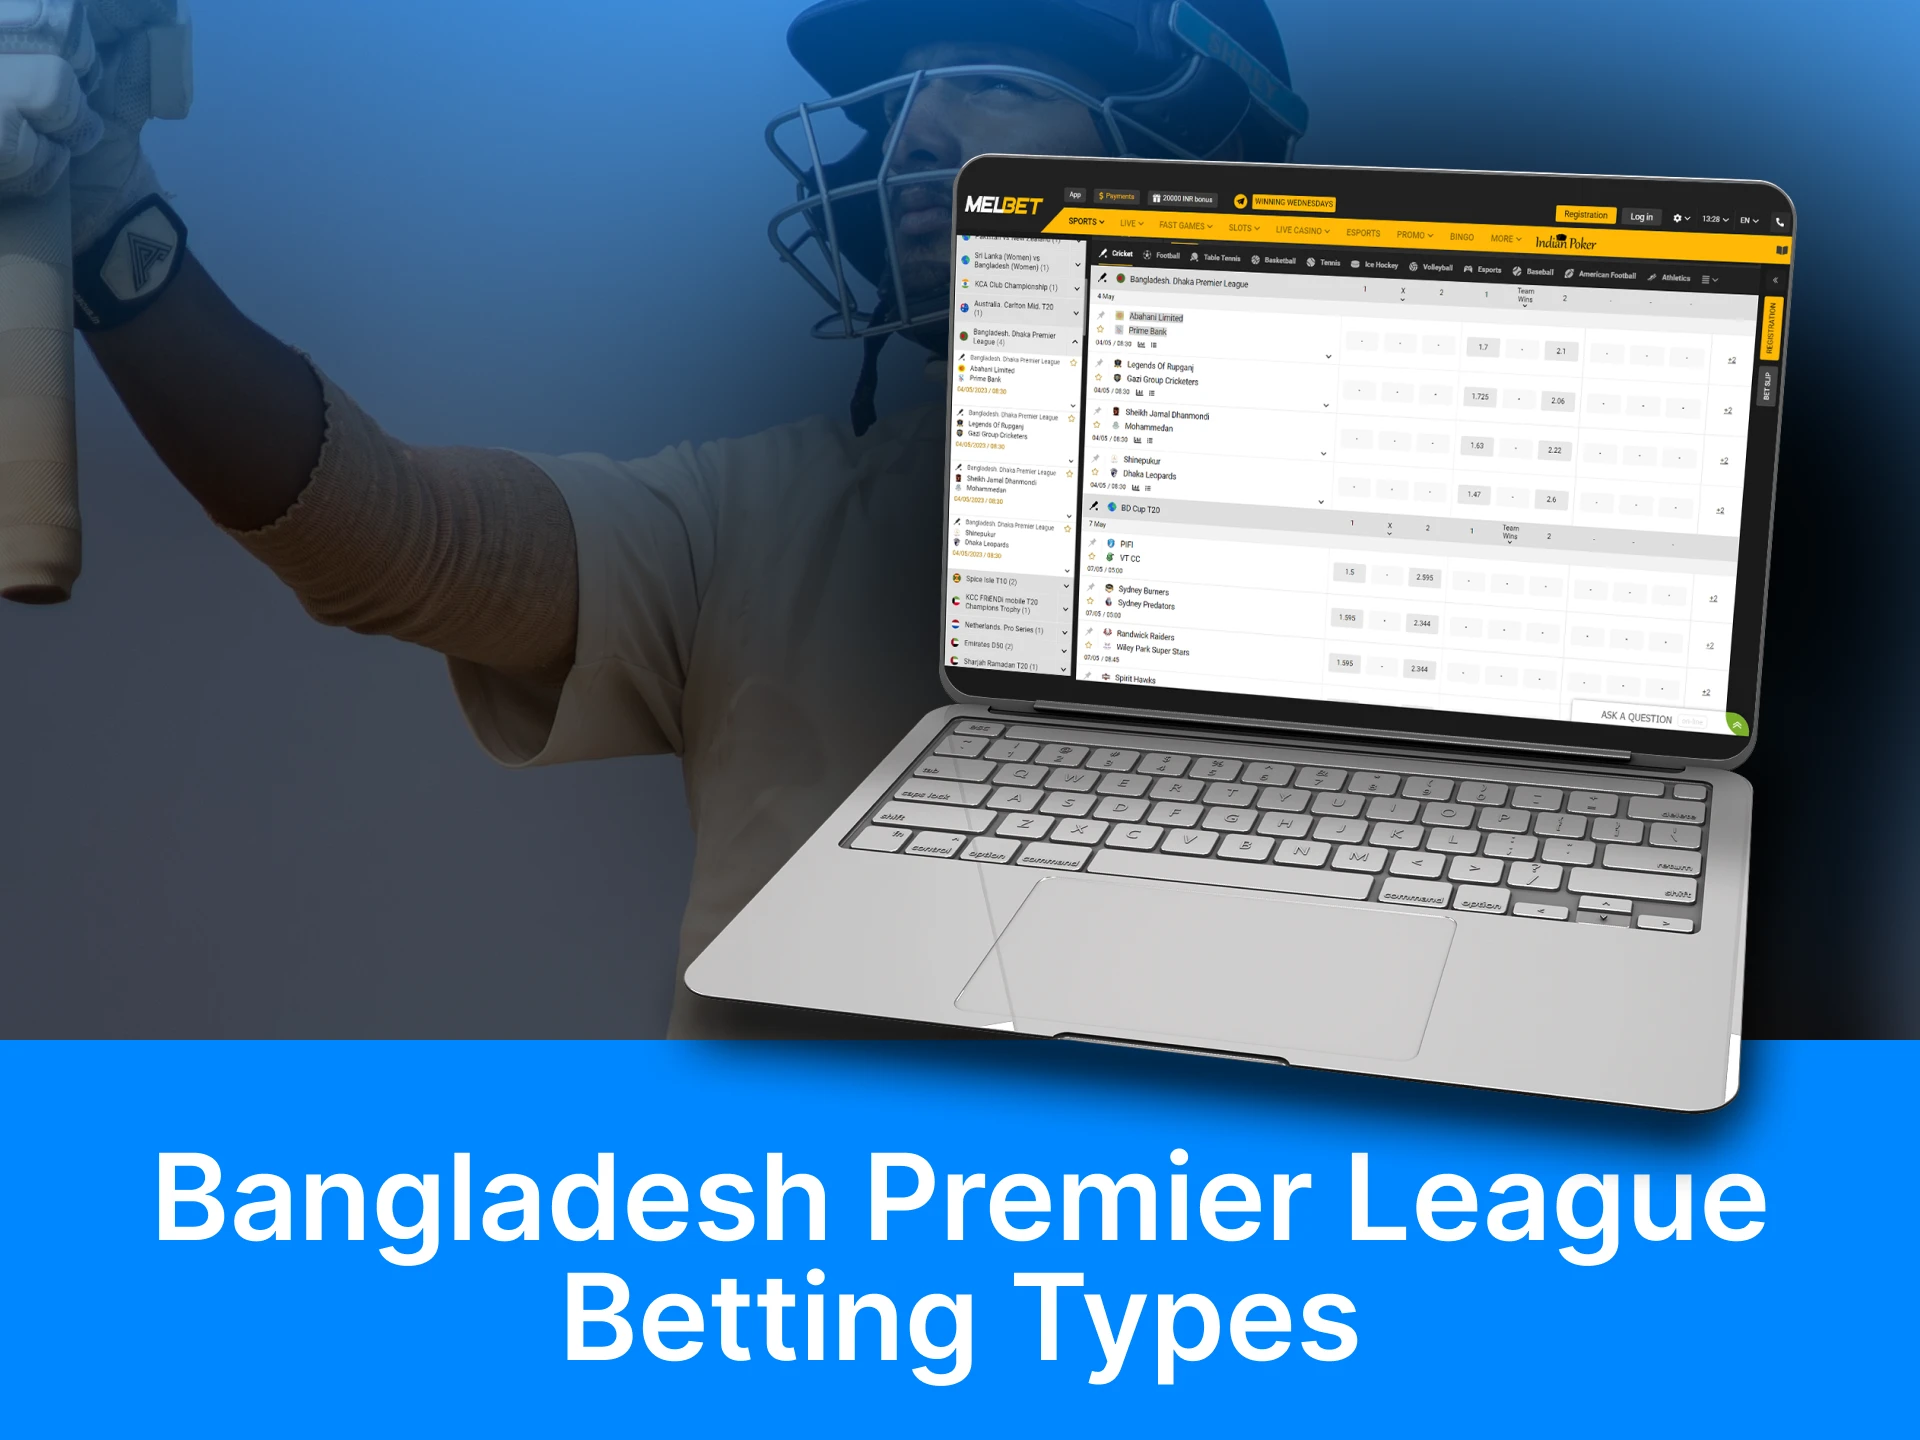 Bookmakers provide different types of bets for BPL events.